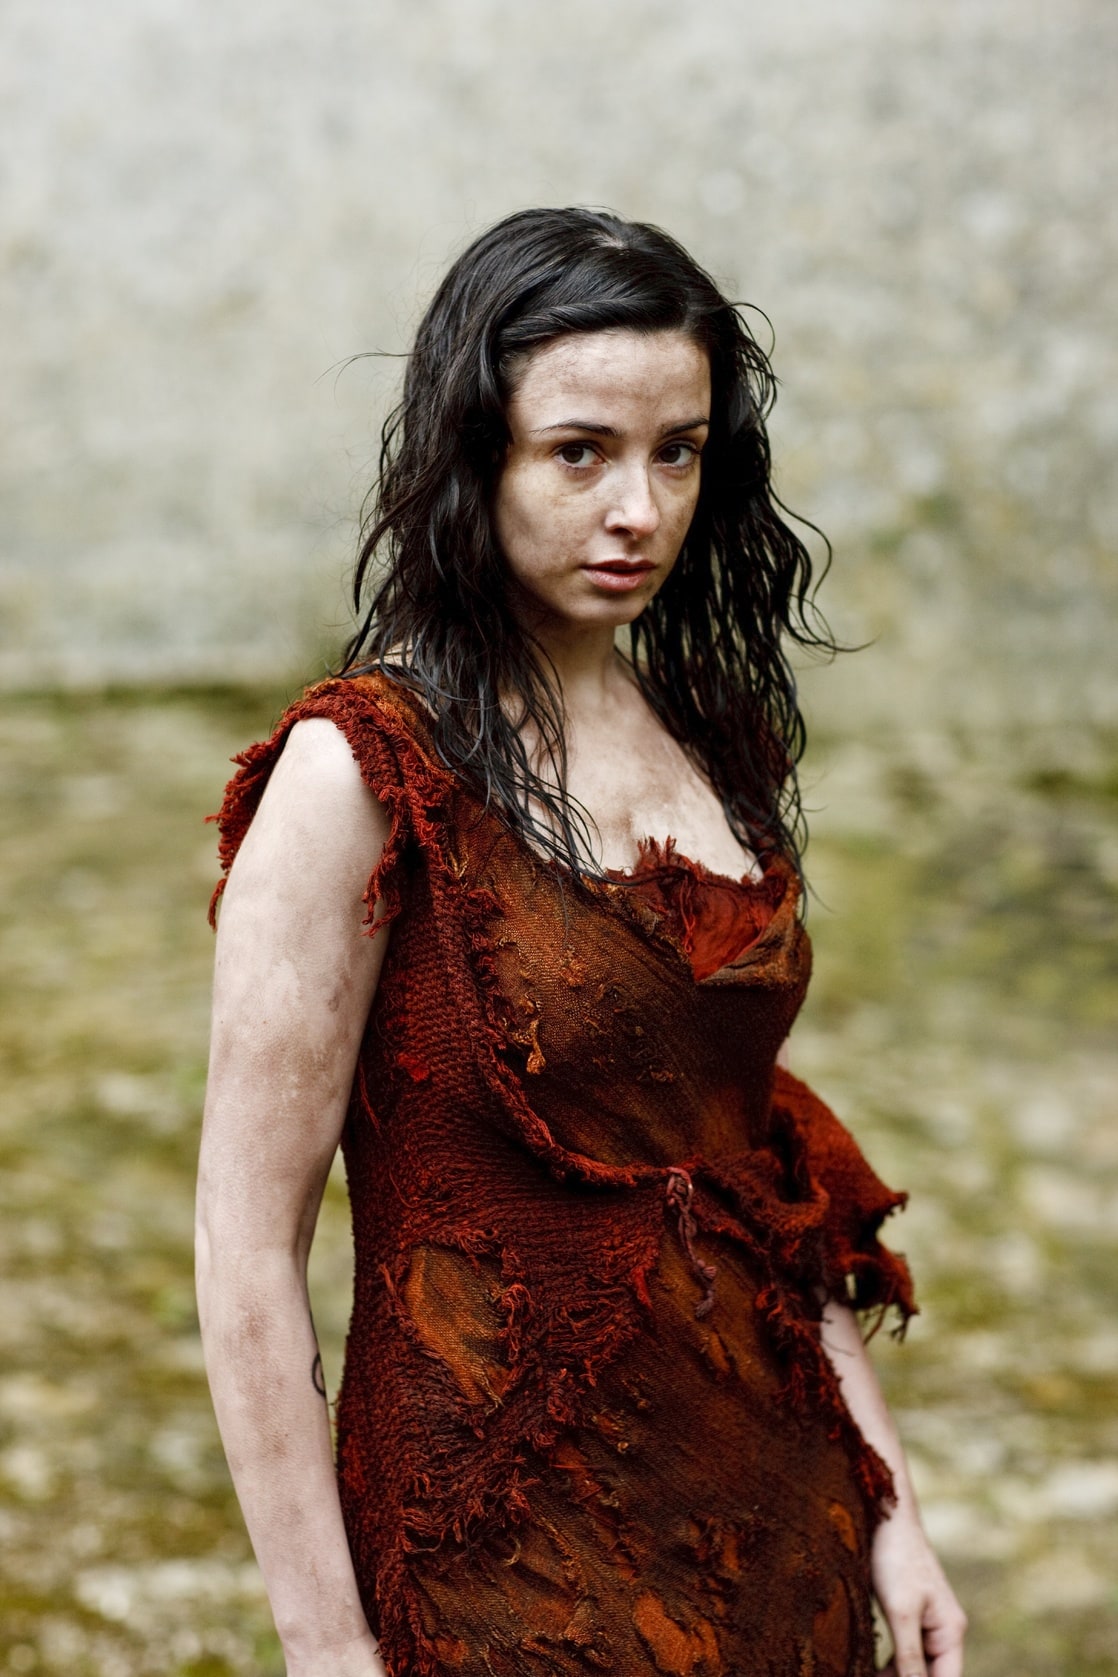 Laura donnelly photos